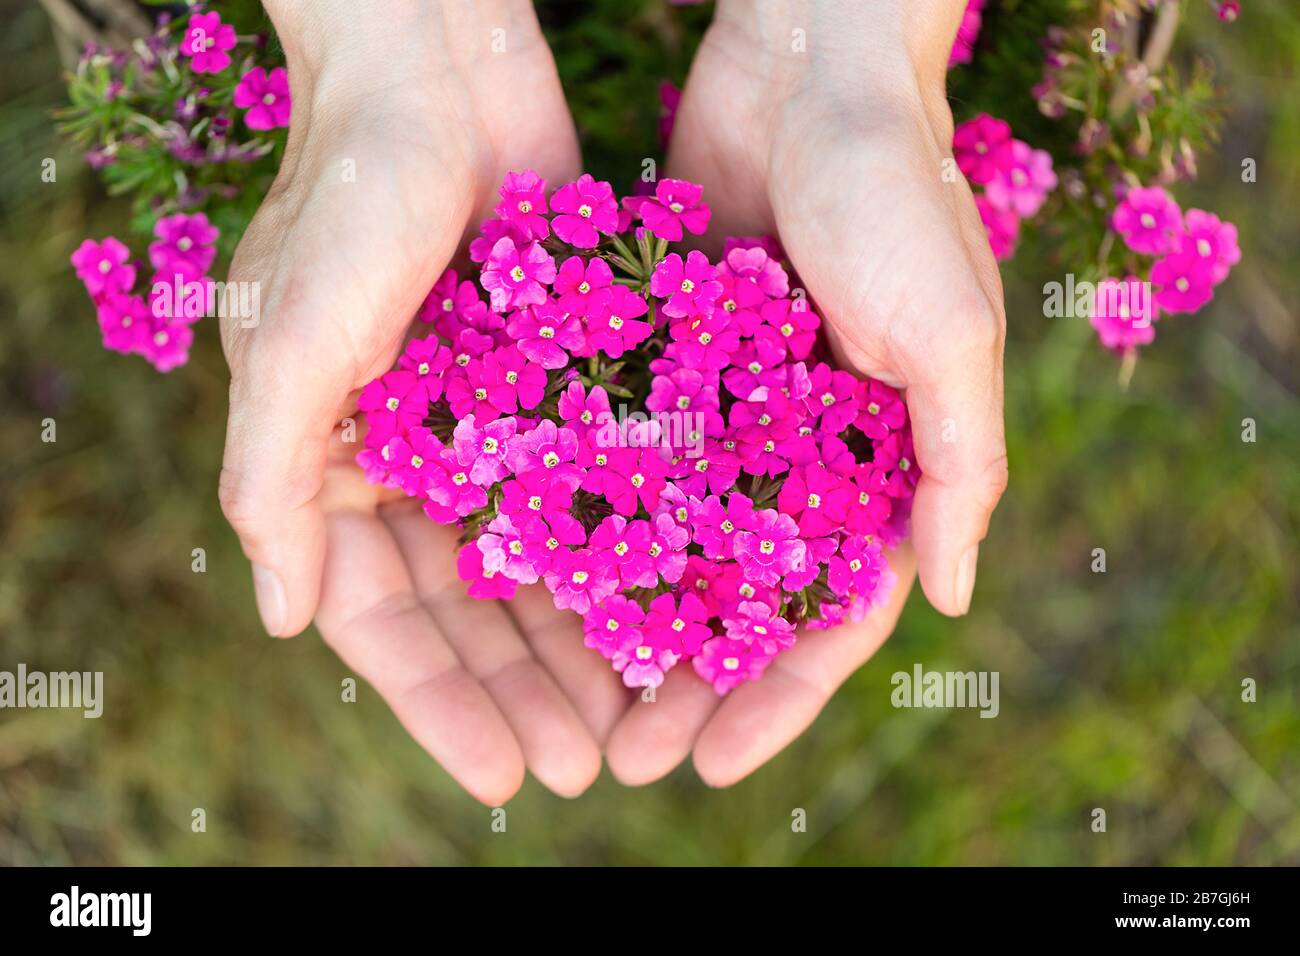 Small pink flowers in female hands Stock Photo